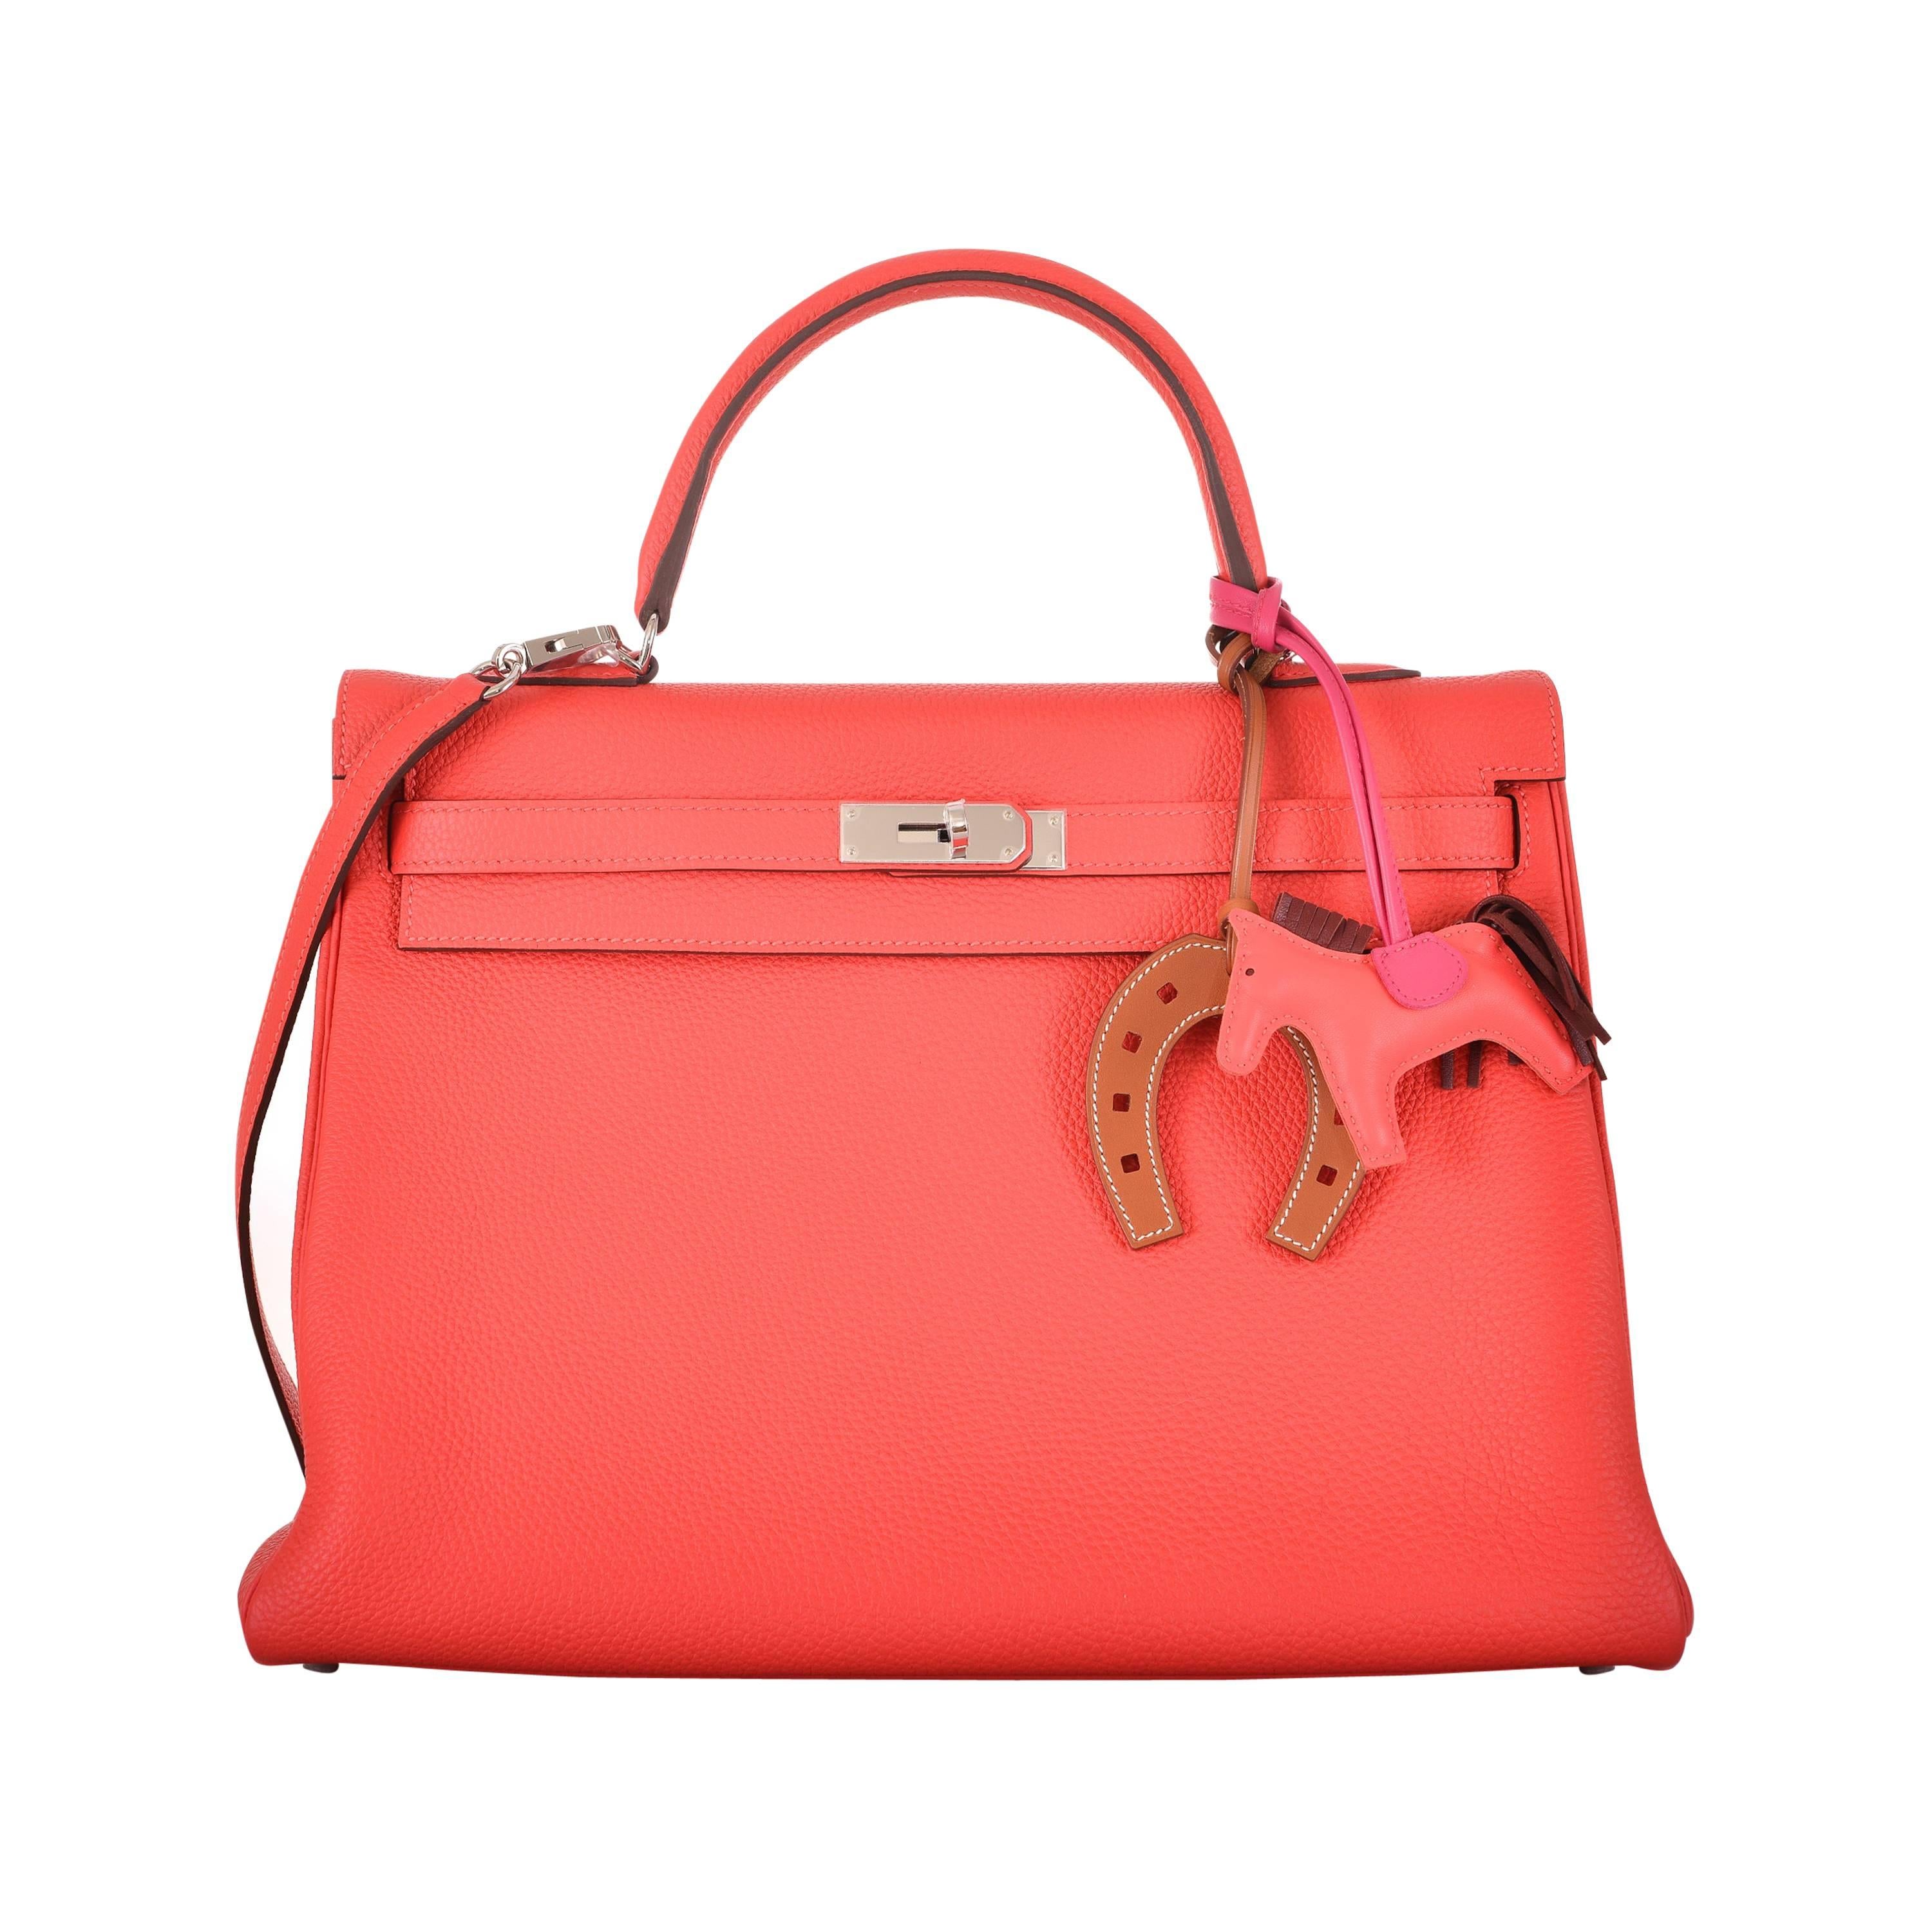 HERMES KELLY BAG 35cm ROUGE PIVOINE WITH PALLADIUM HARDWARE MY FAVE JaneFinds For Sale